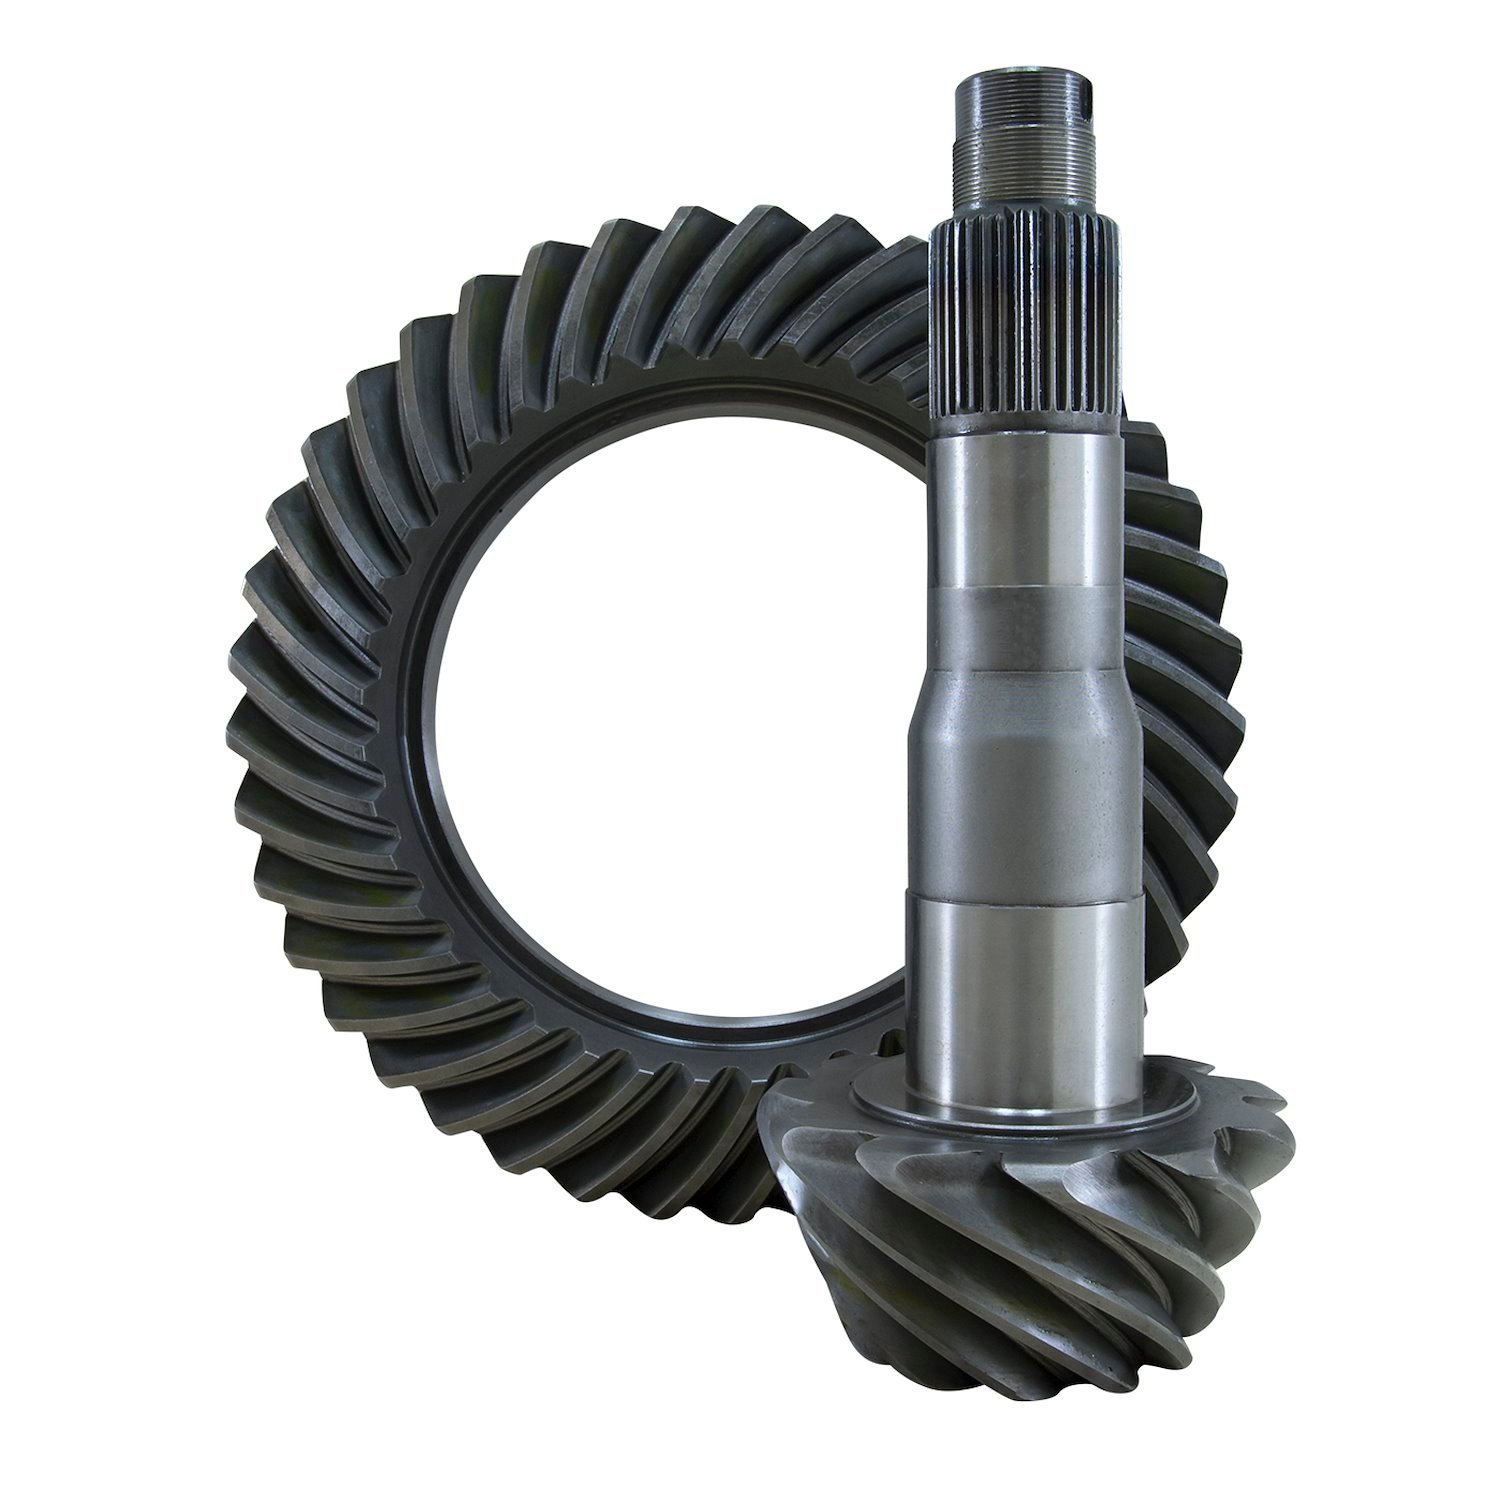 USA Standard 36431 Ring & Pinion Gear Set, For '11 & Up Ford 10.5 in., 4.88 Ratio.